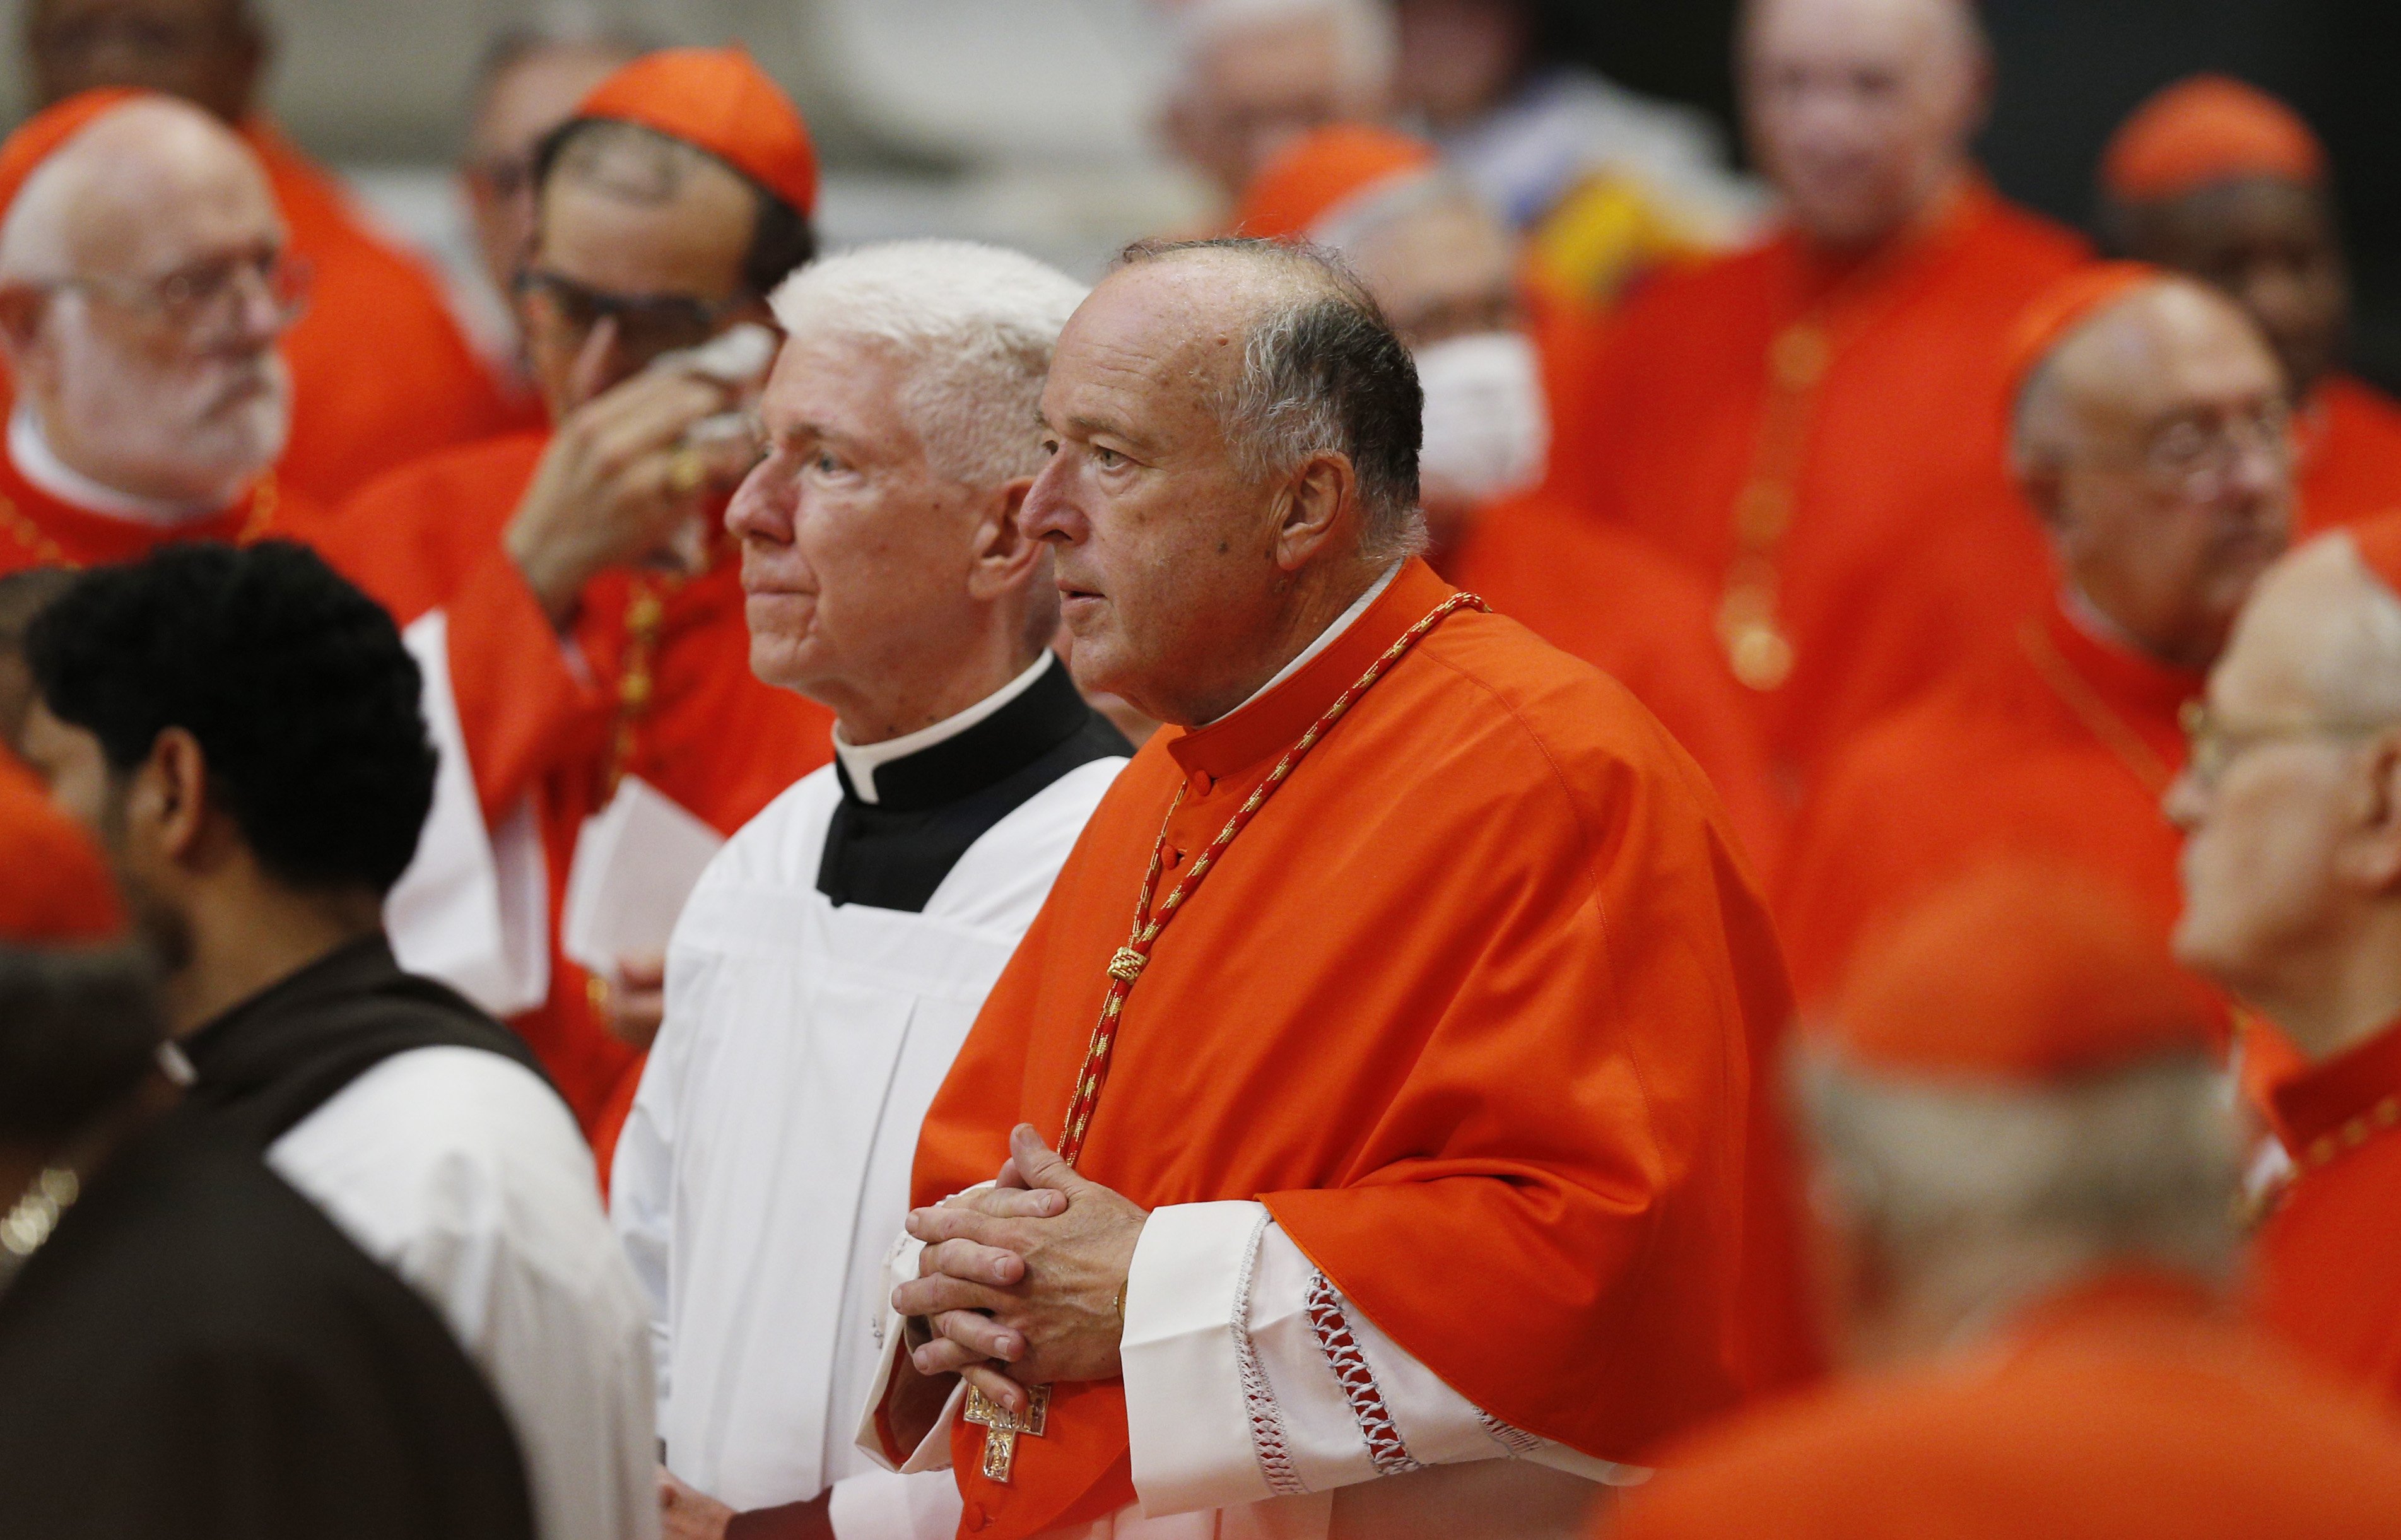 Pope creates 20 new cardinals, including San Diego bishop, Articles